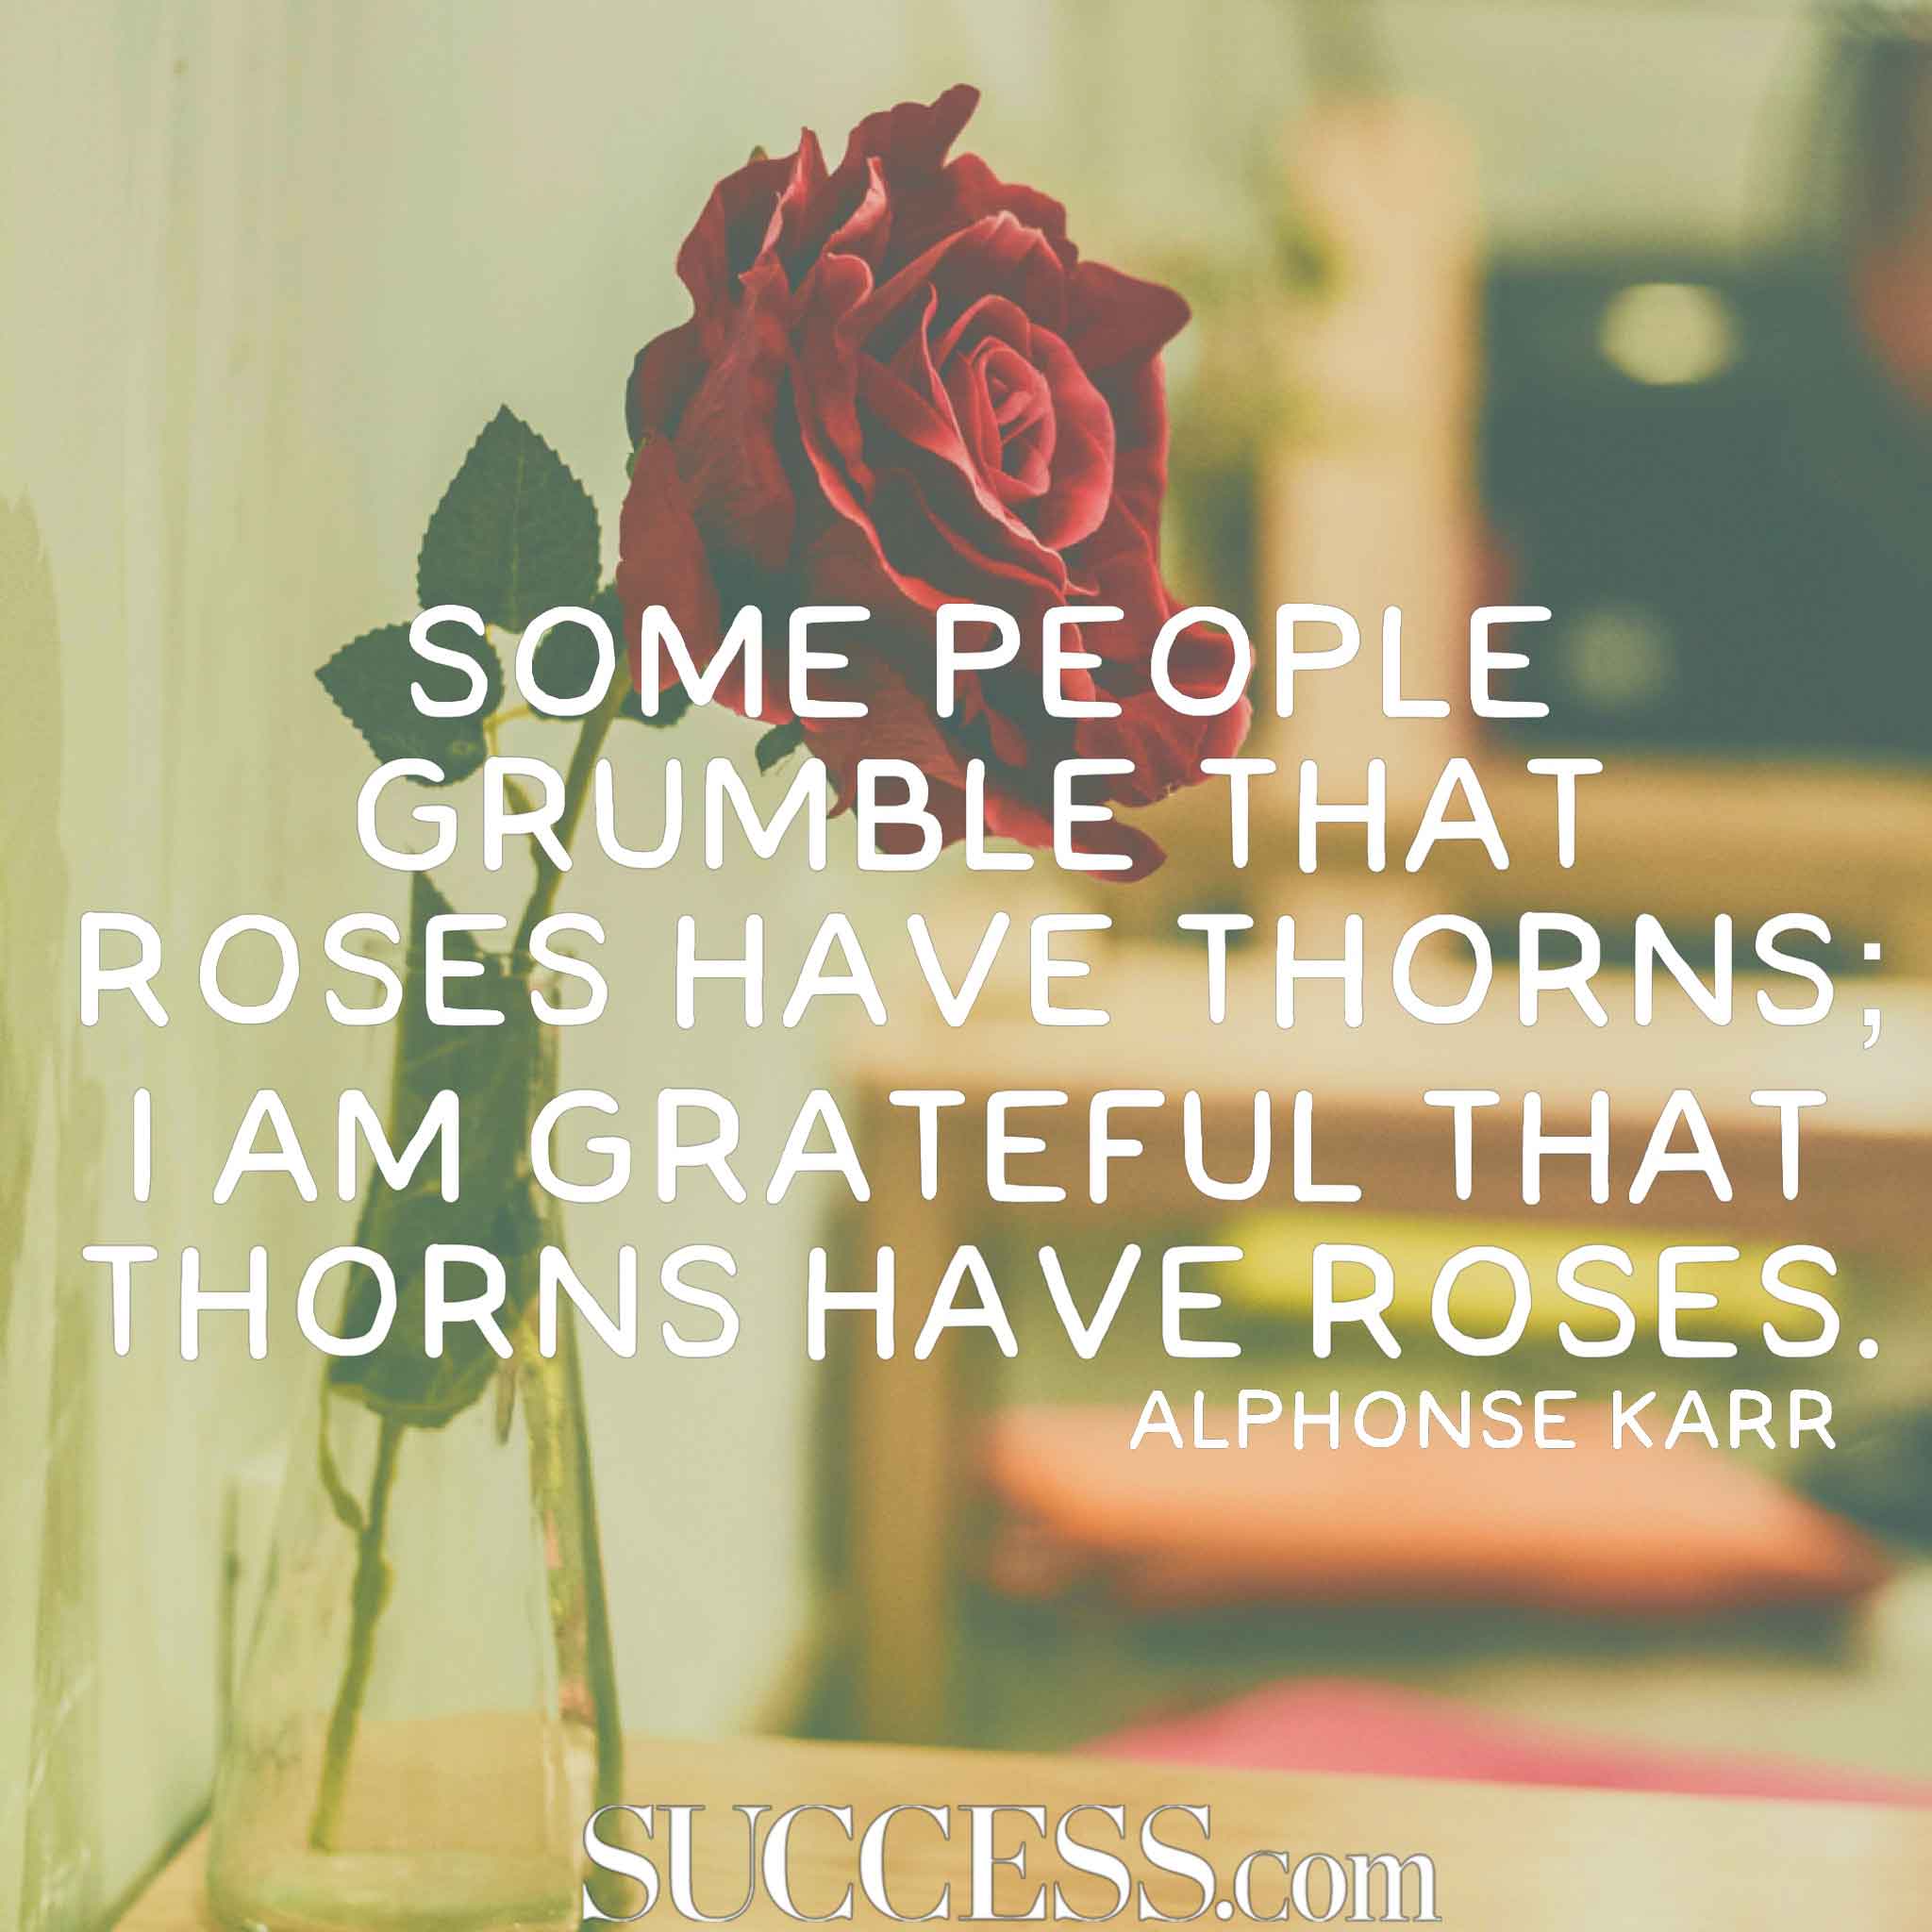 32 Quotes About Gratitude - Actionjacquelyn